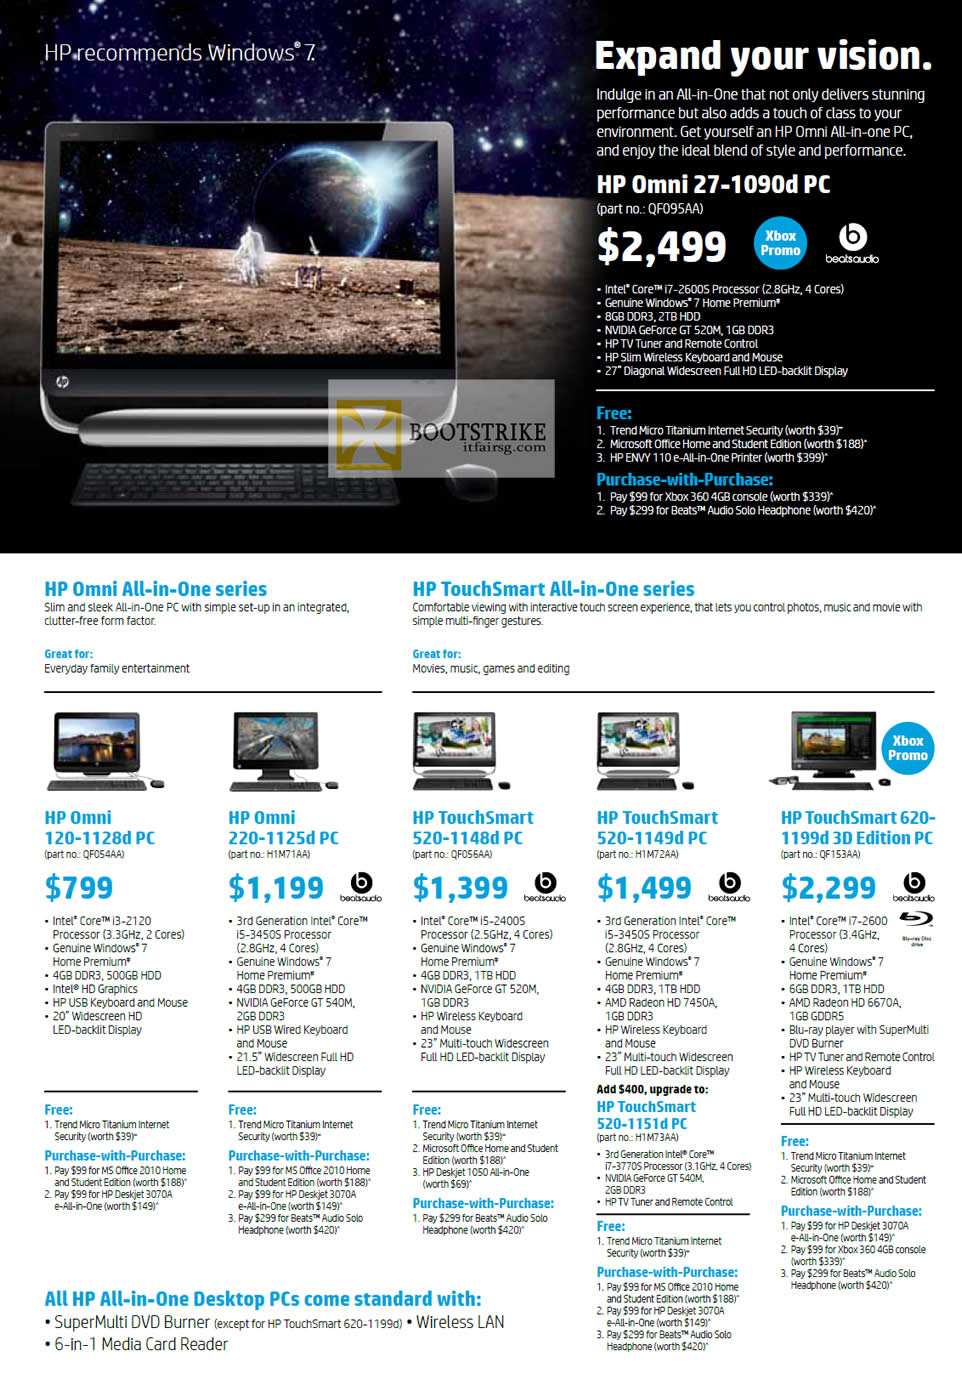 PC SHOW 2012 price list image brochure of HP Desktop PC AIO Omni 27-1090d, 120-1128d, 220-1125d, TouchSmart 520-1148d, 520-1149d, 520-1151d, 620-1199d 3D Edition